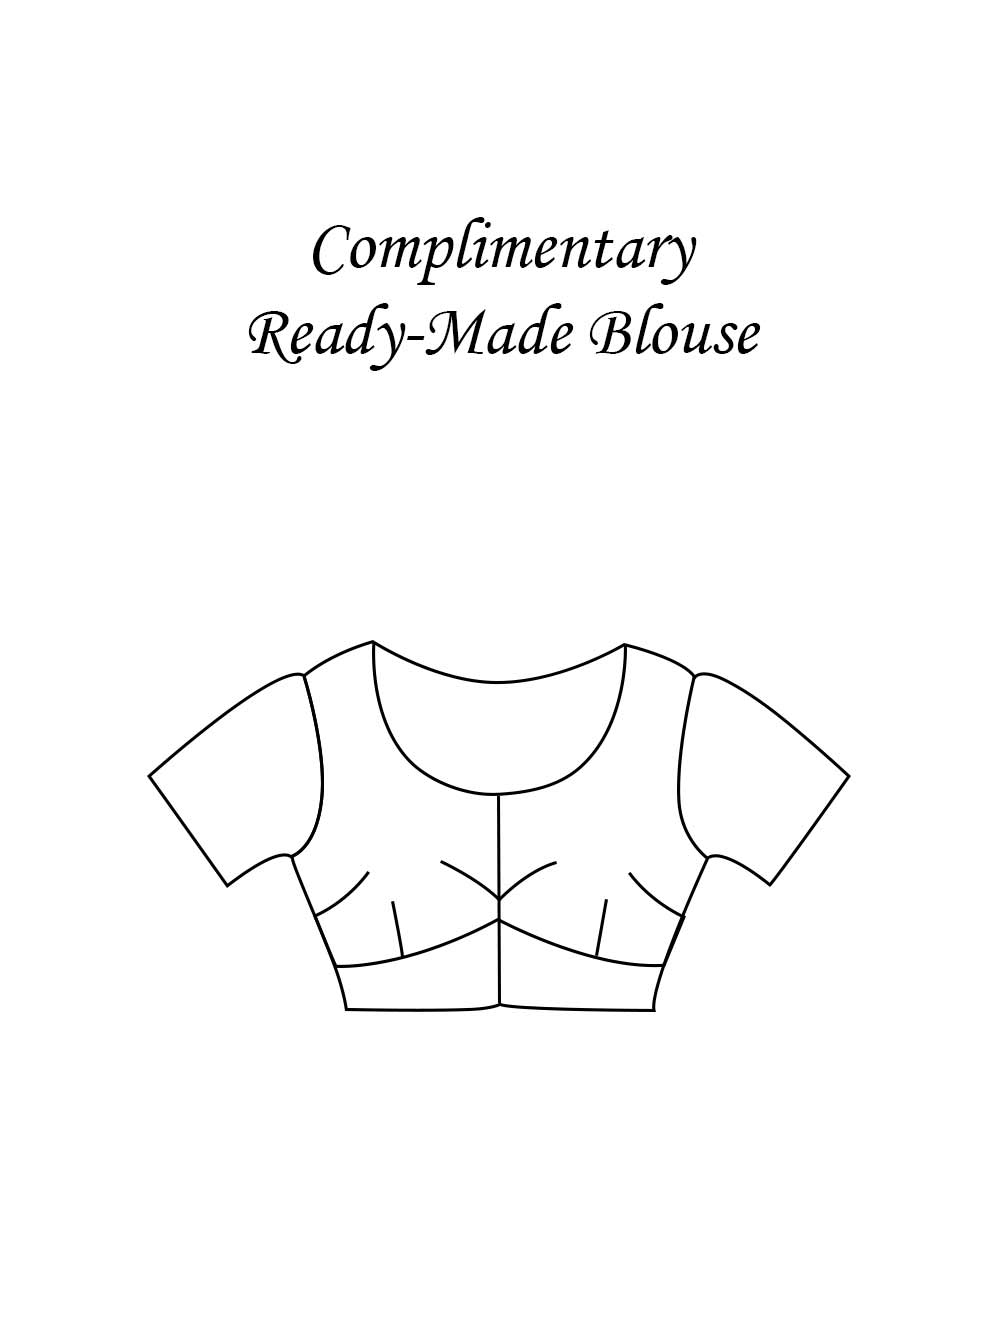 Draw online - Simple blouse designs sketch.. ..... #handembroidery  #handembroidered #handembroiderywork #handembellished #embroiderysketch  #embroiderysketches #embroiderysketchbook #embroiderysketching  #embroiderydesign #embroiderydesigns ...